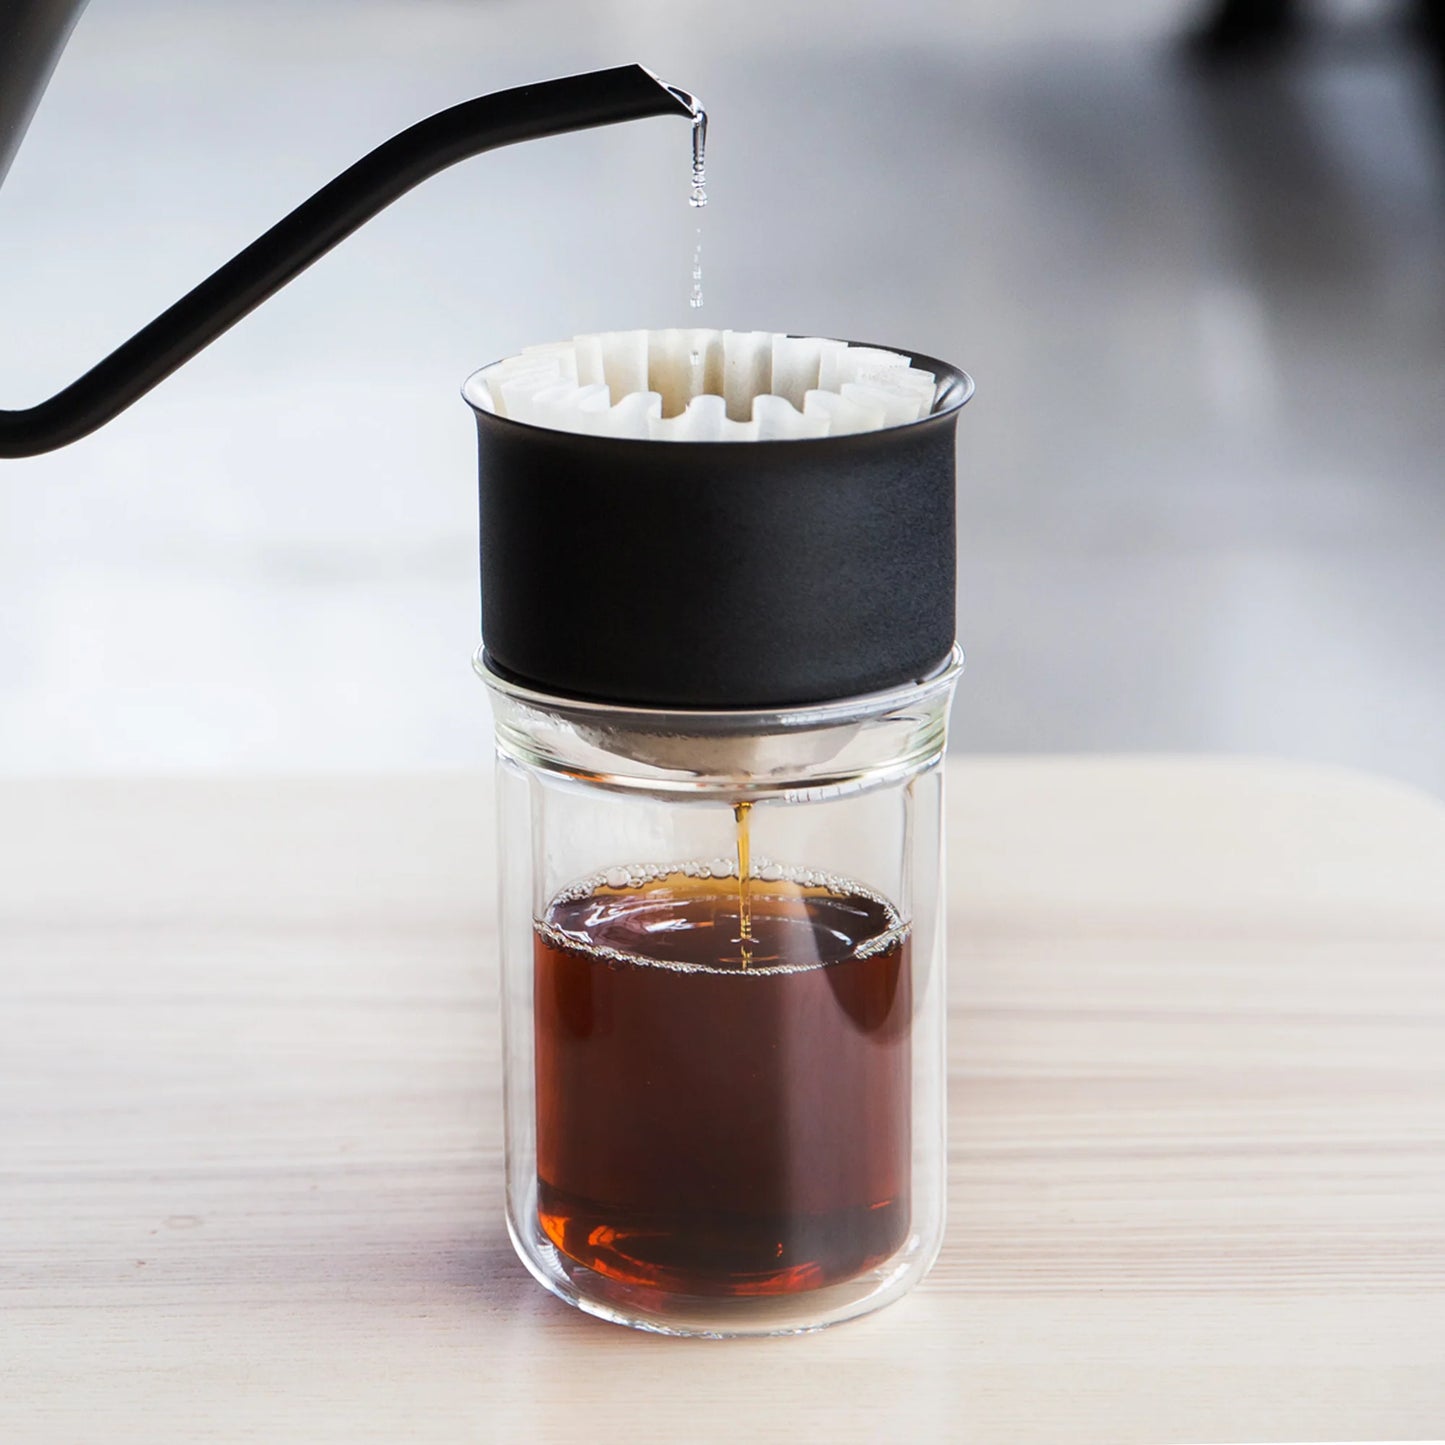 https://cdn.shopify.com/s/files/1/0550/4119/6267/files/Stagg-Pour-Over-Drippers-02-Stagg-X-02_1445x.webp?v=1696360763